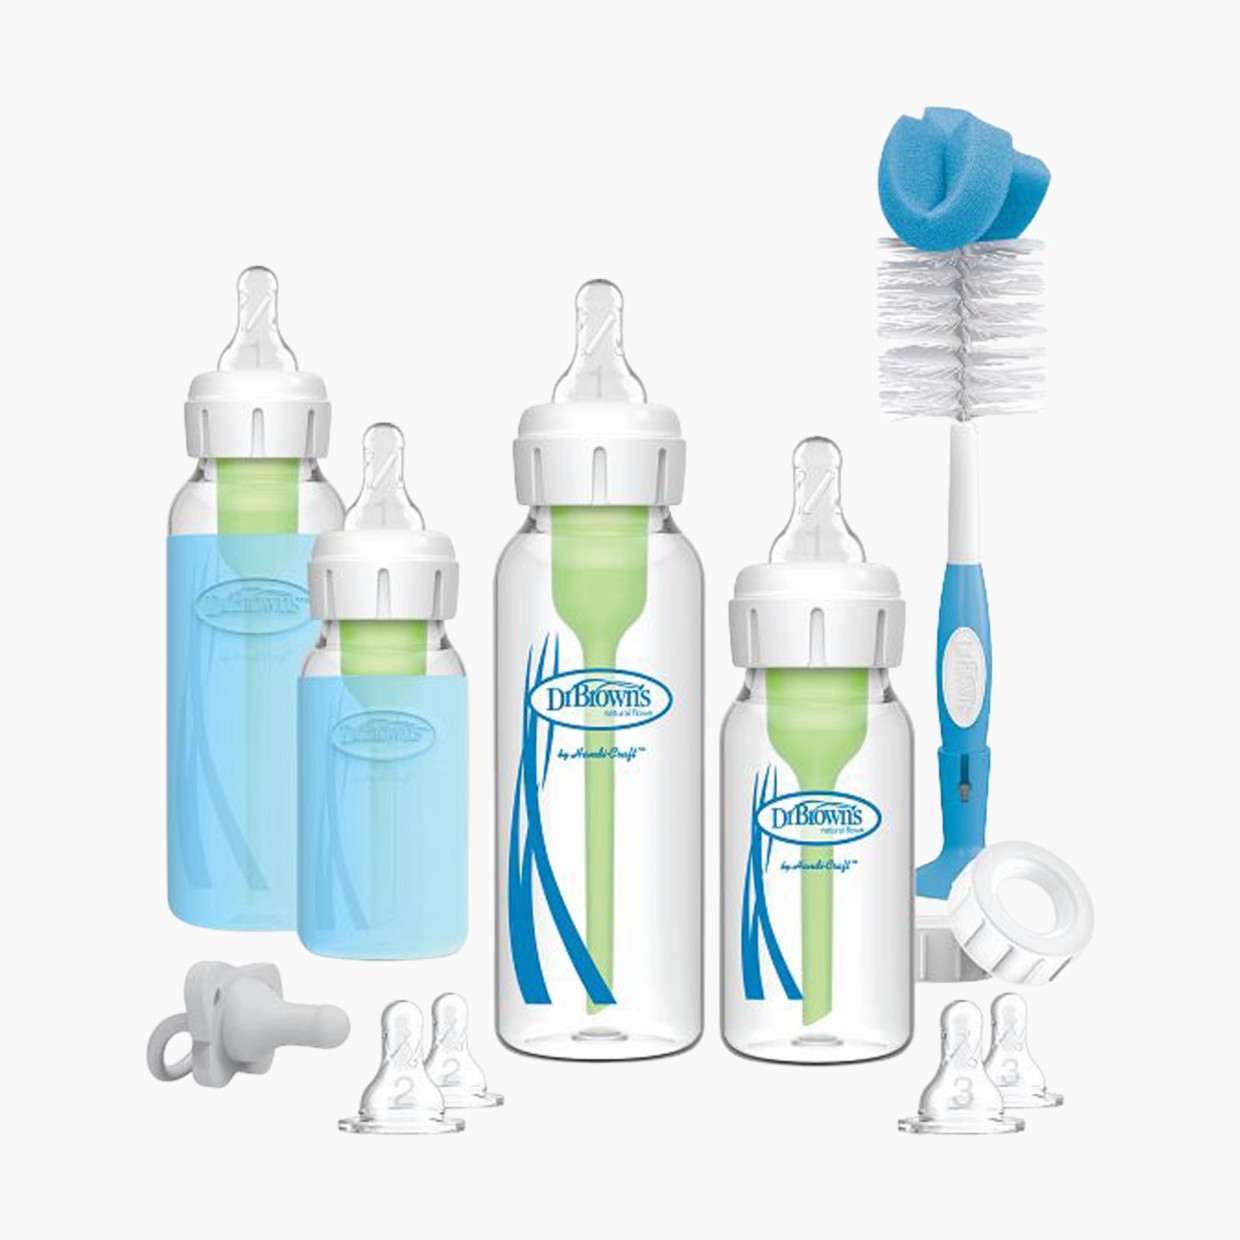 Dr. Brown's Options+ Glass Narrow Anti-Colic Baby Bottle Gift Set - Clear/White.